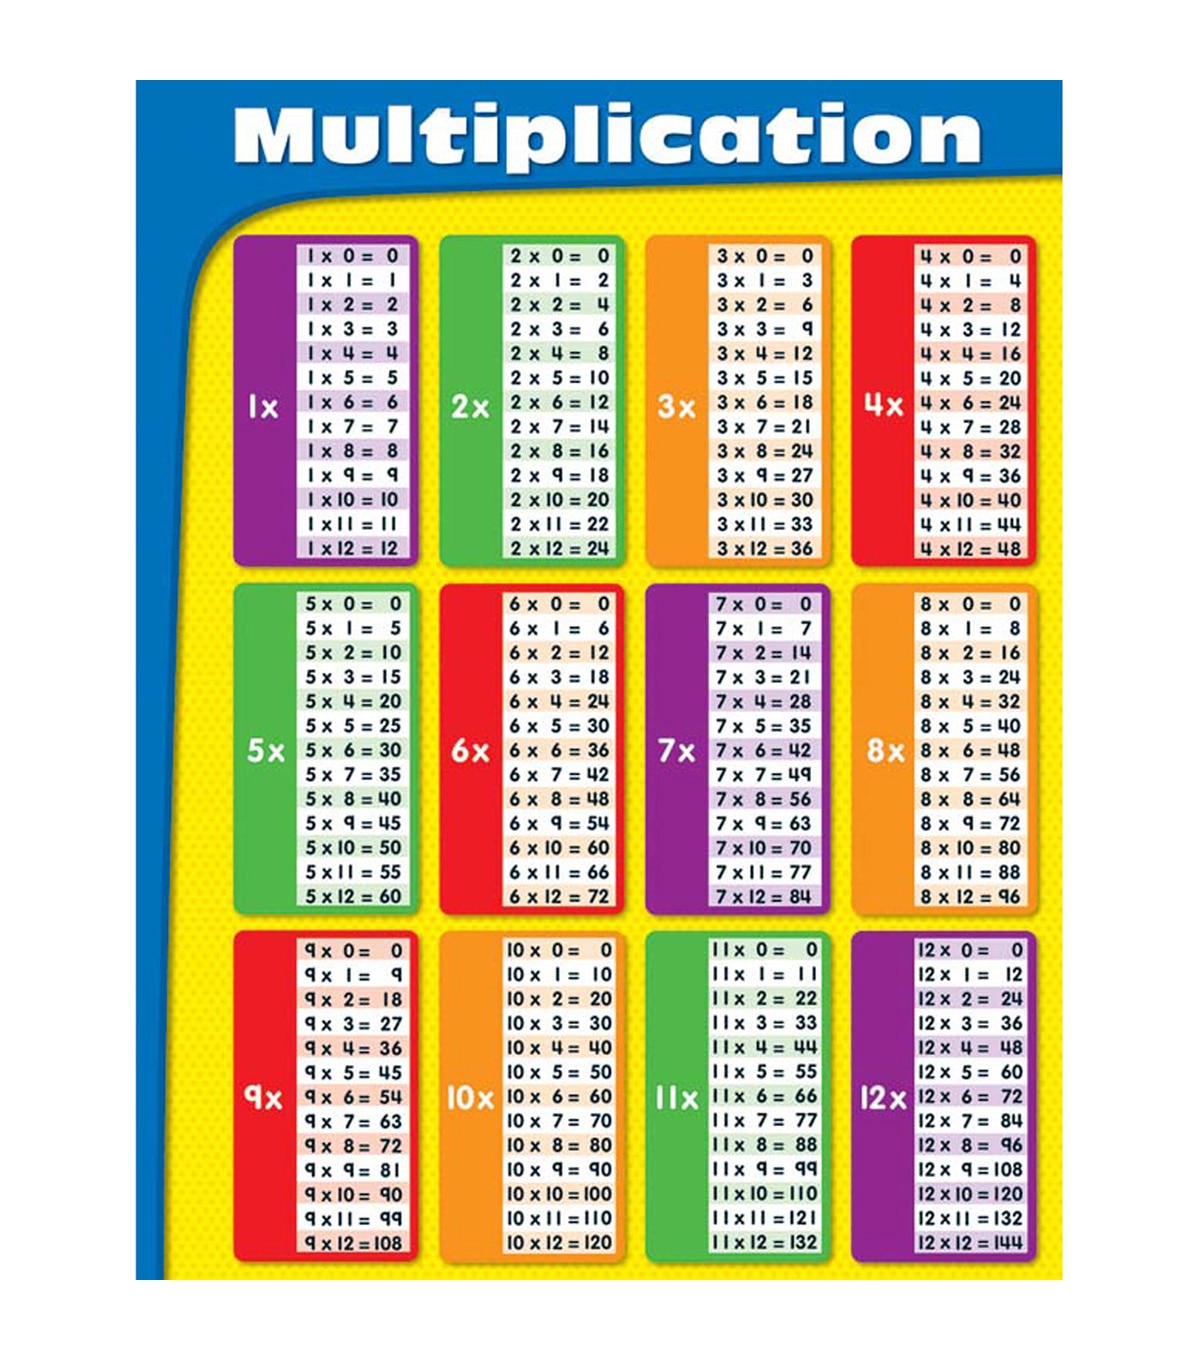 Show Me A Picture Of A Multiplication Chart